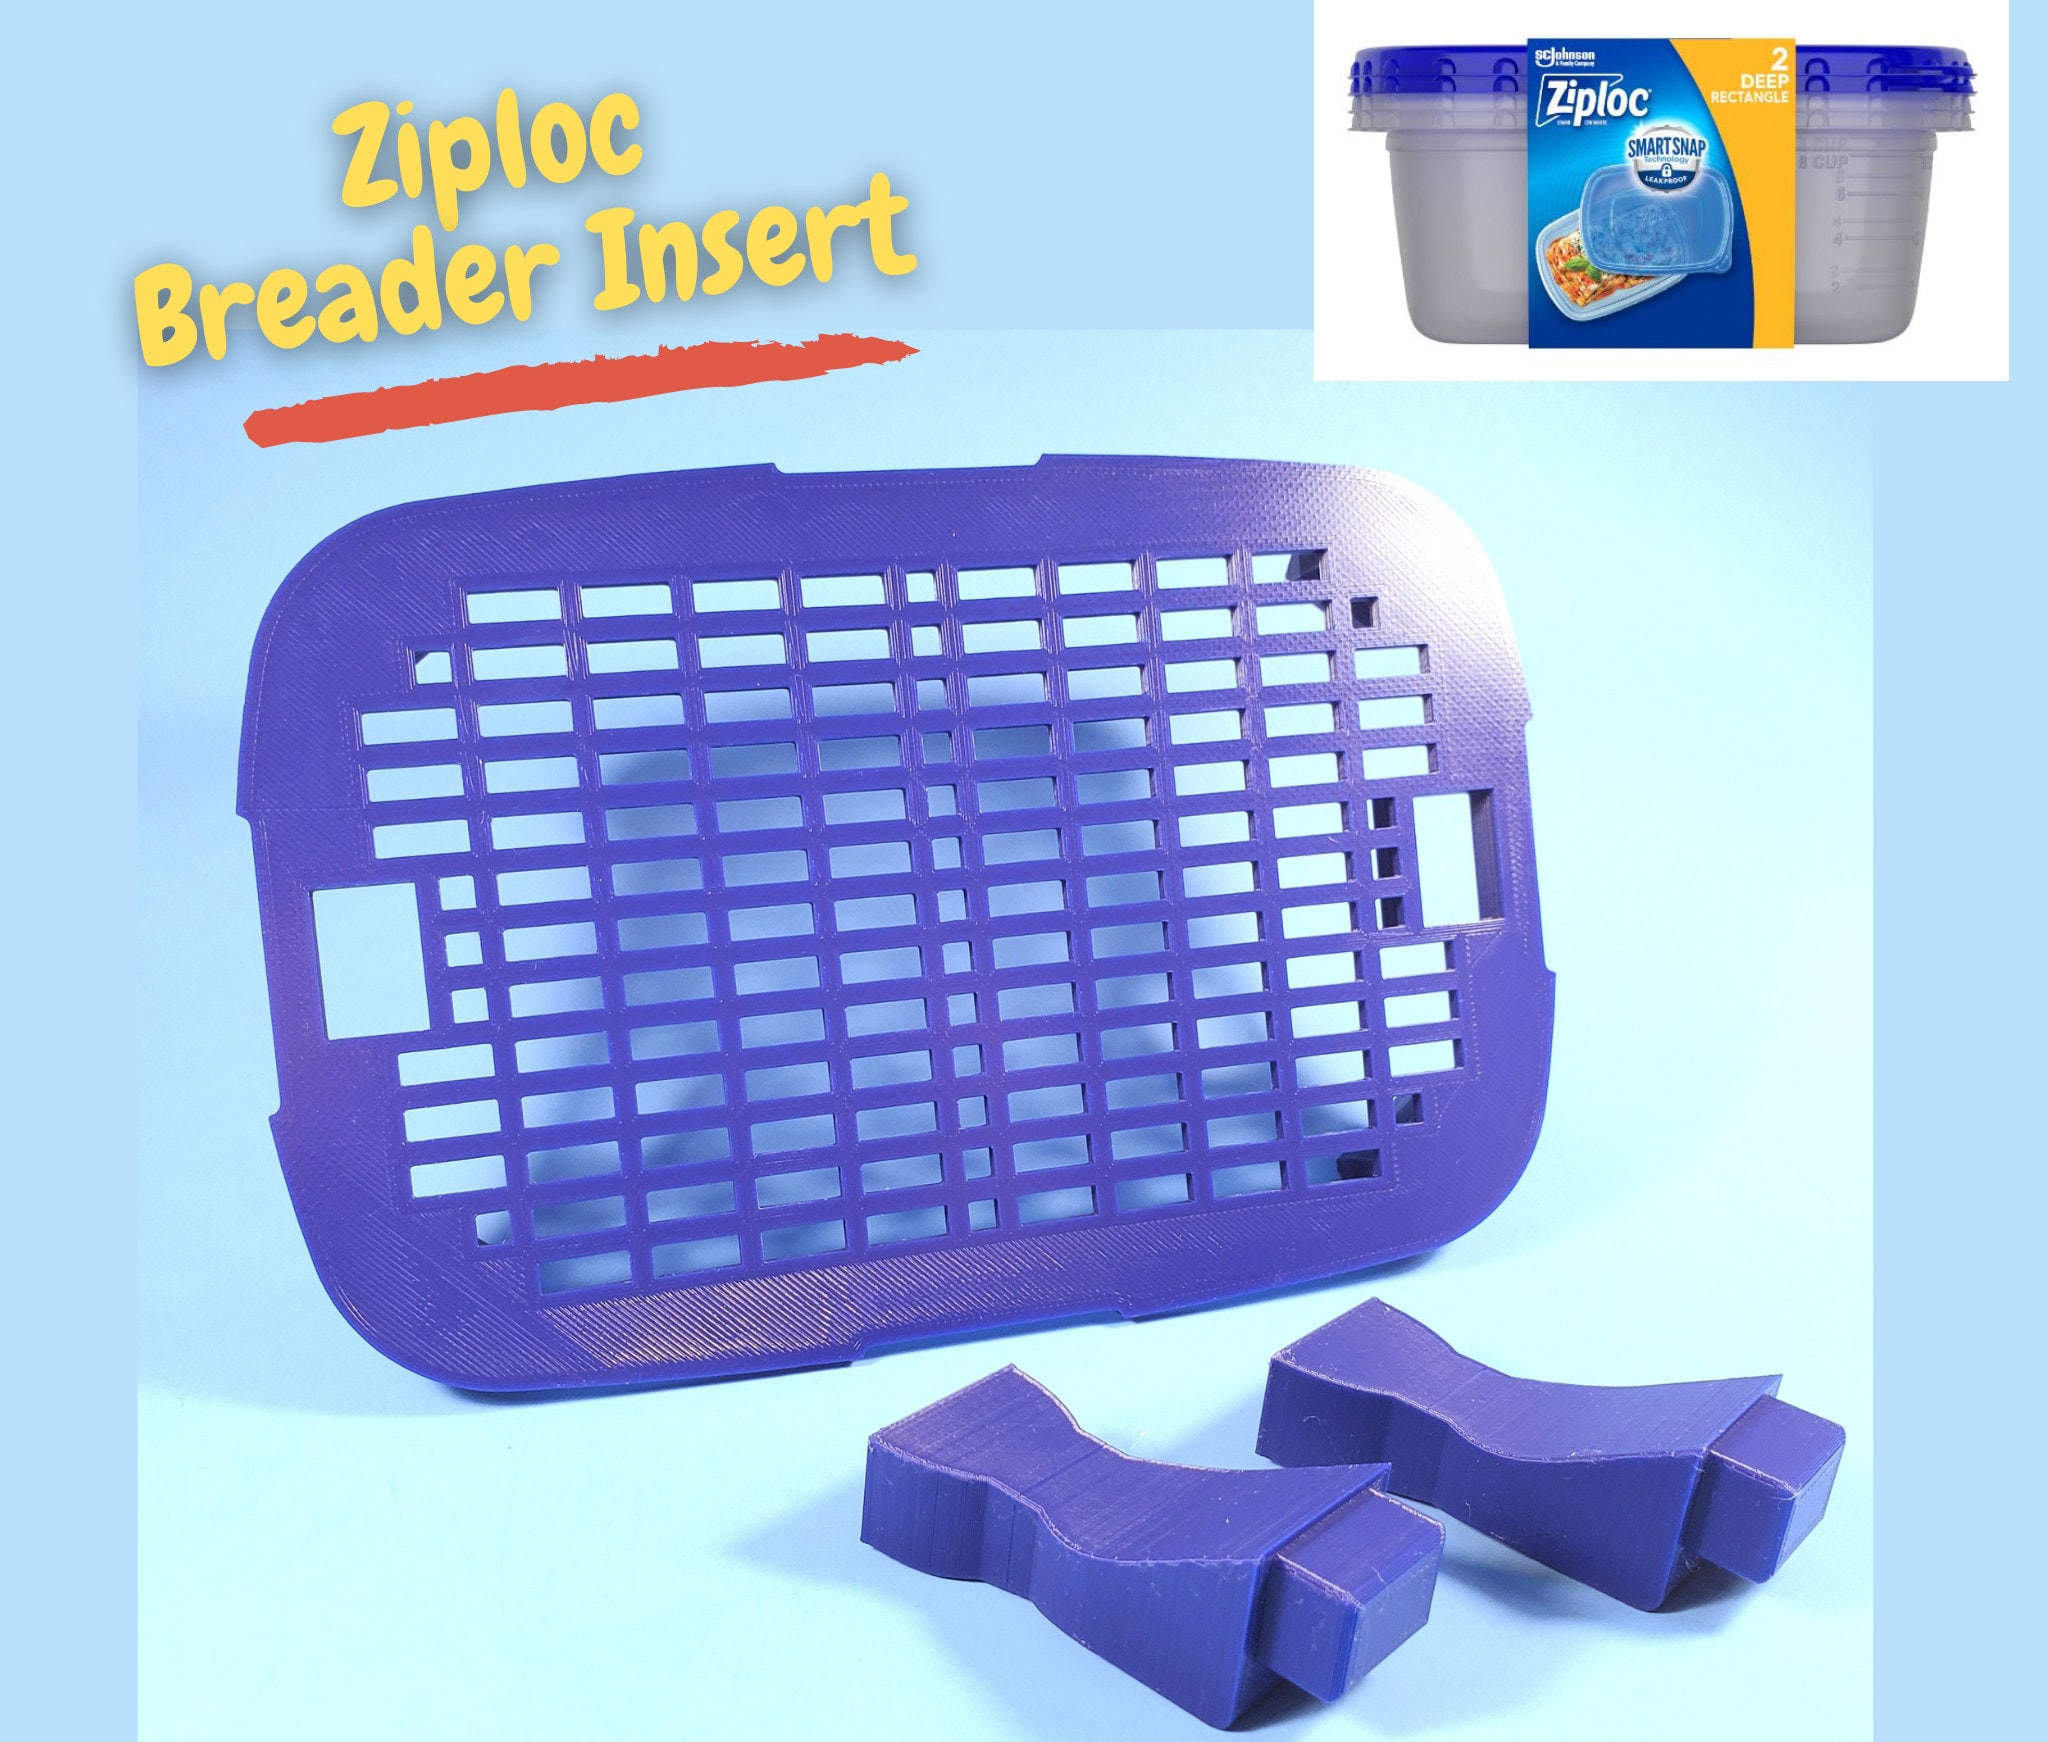 Breader Bowl Insert for Ziploc Container for Breading Hand Cut Fries,  Pickles, Chicken Tenders, Shrimp and More 